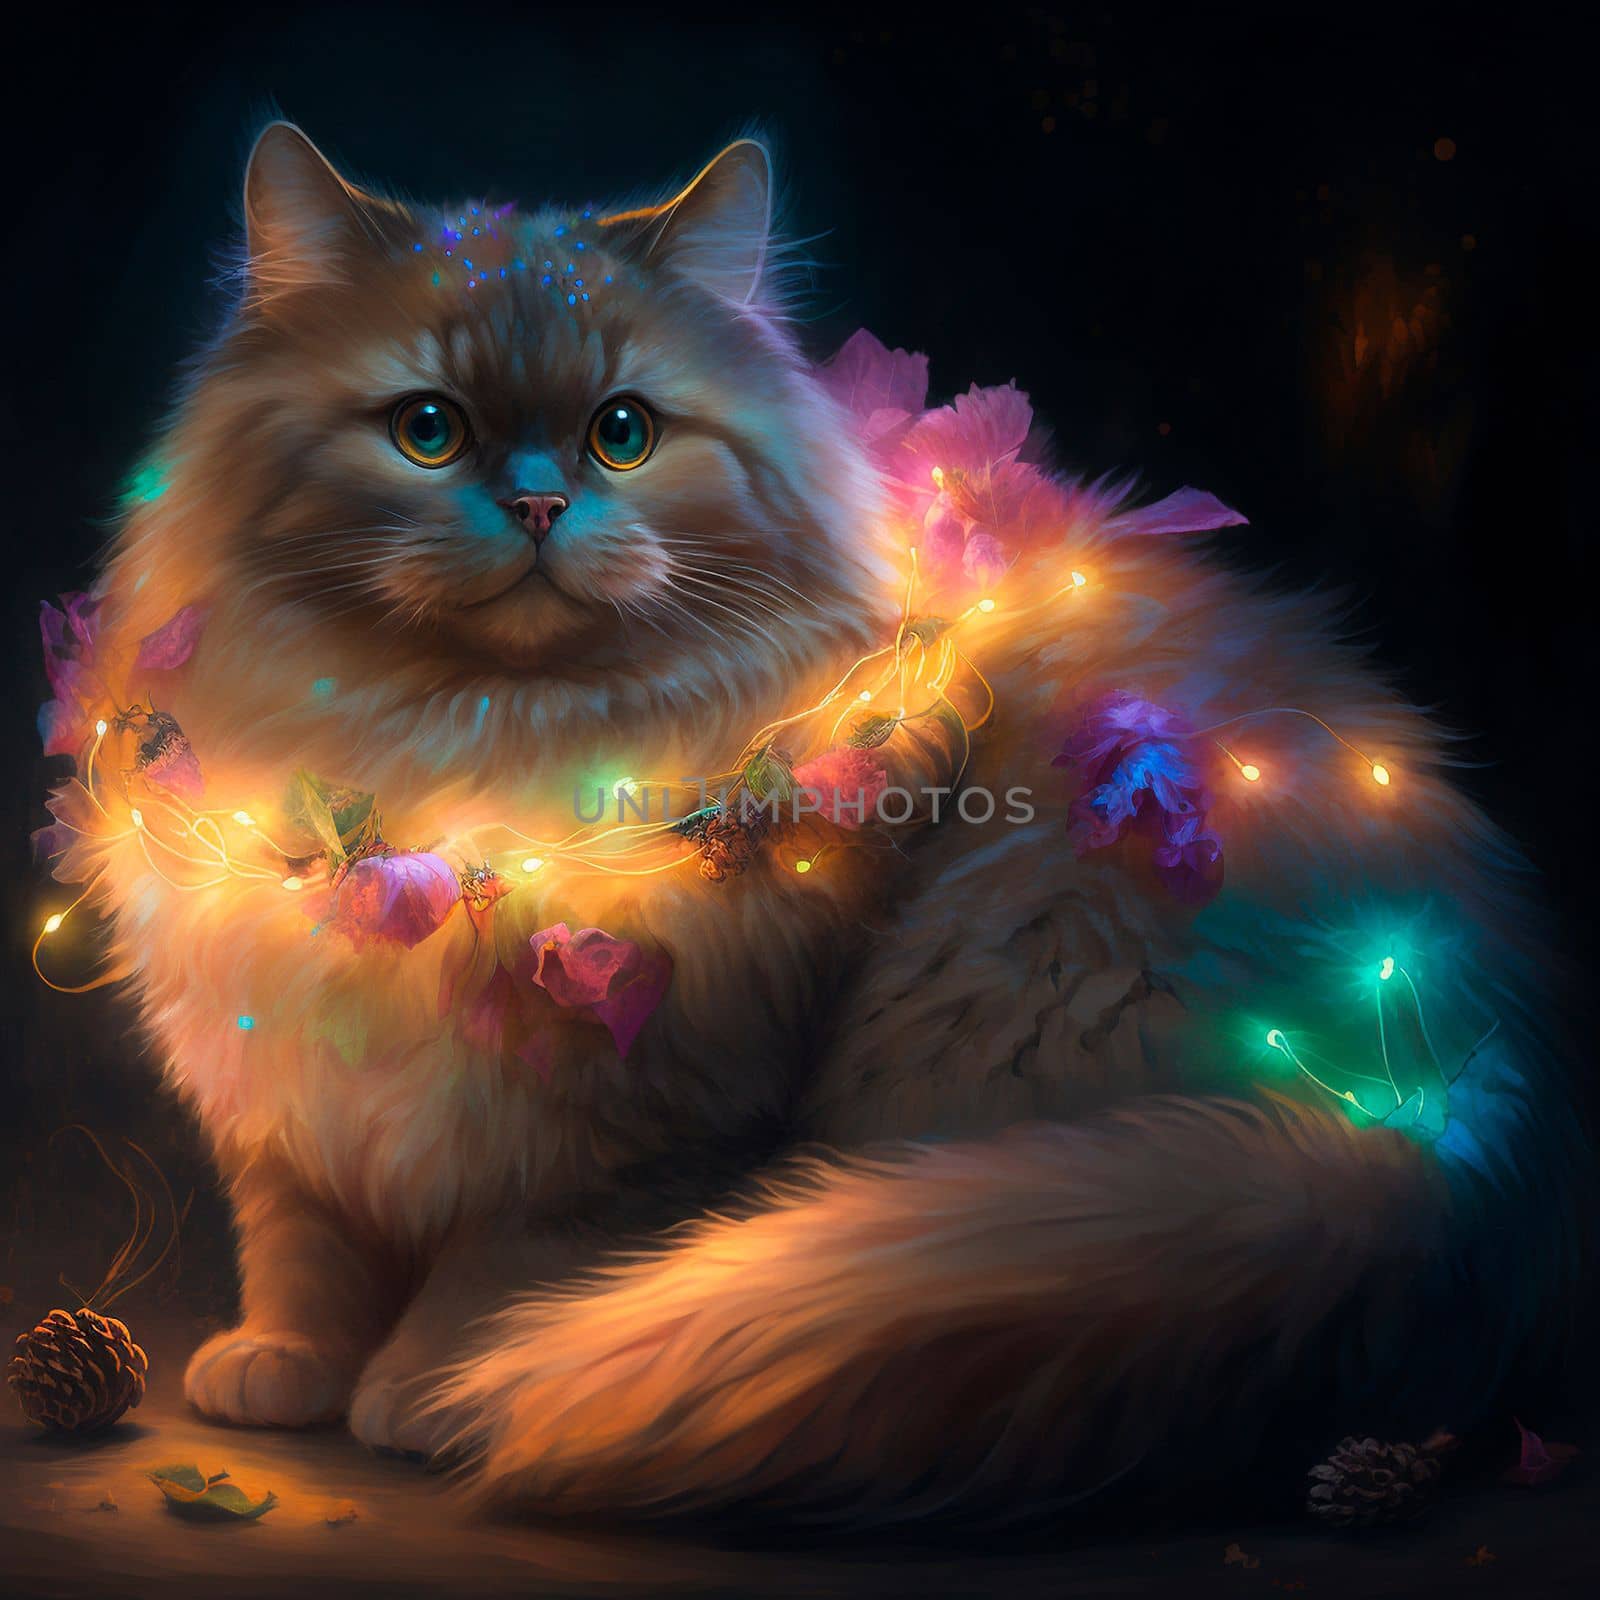 Cat with a garland by NeuroSky